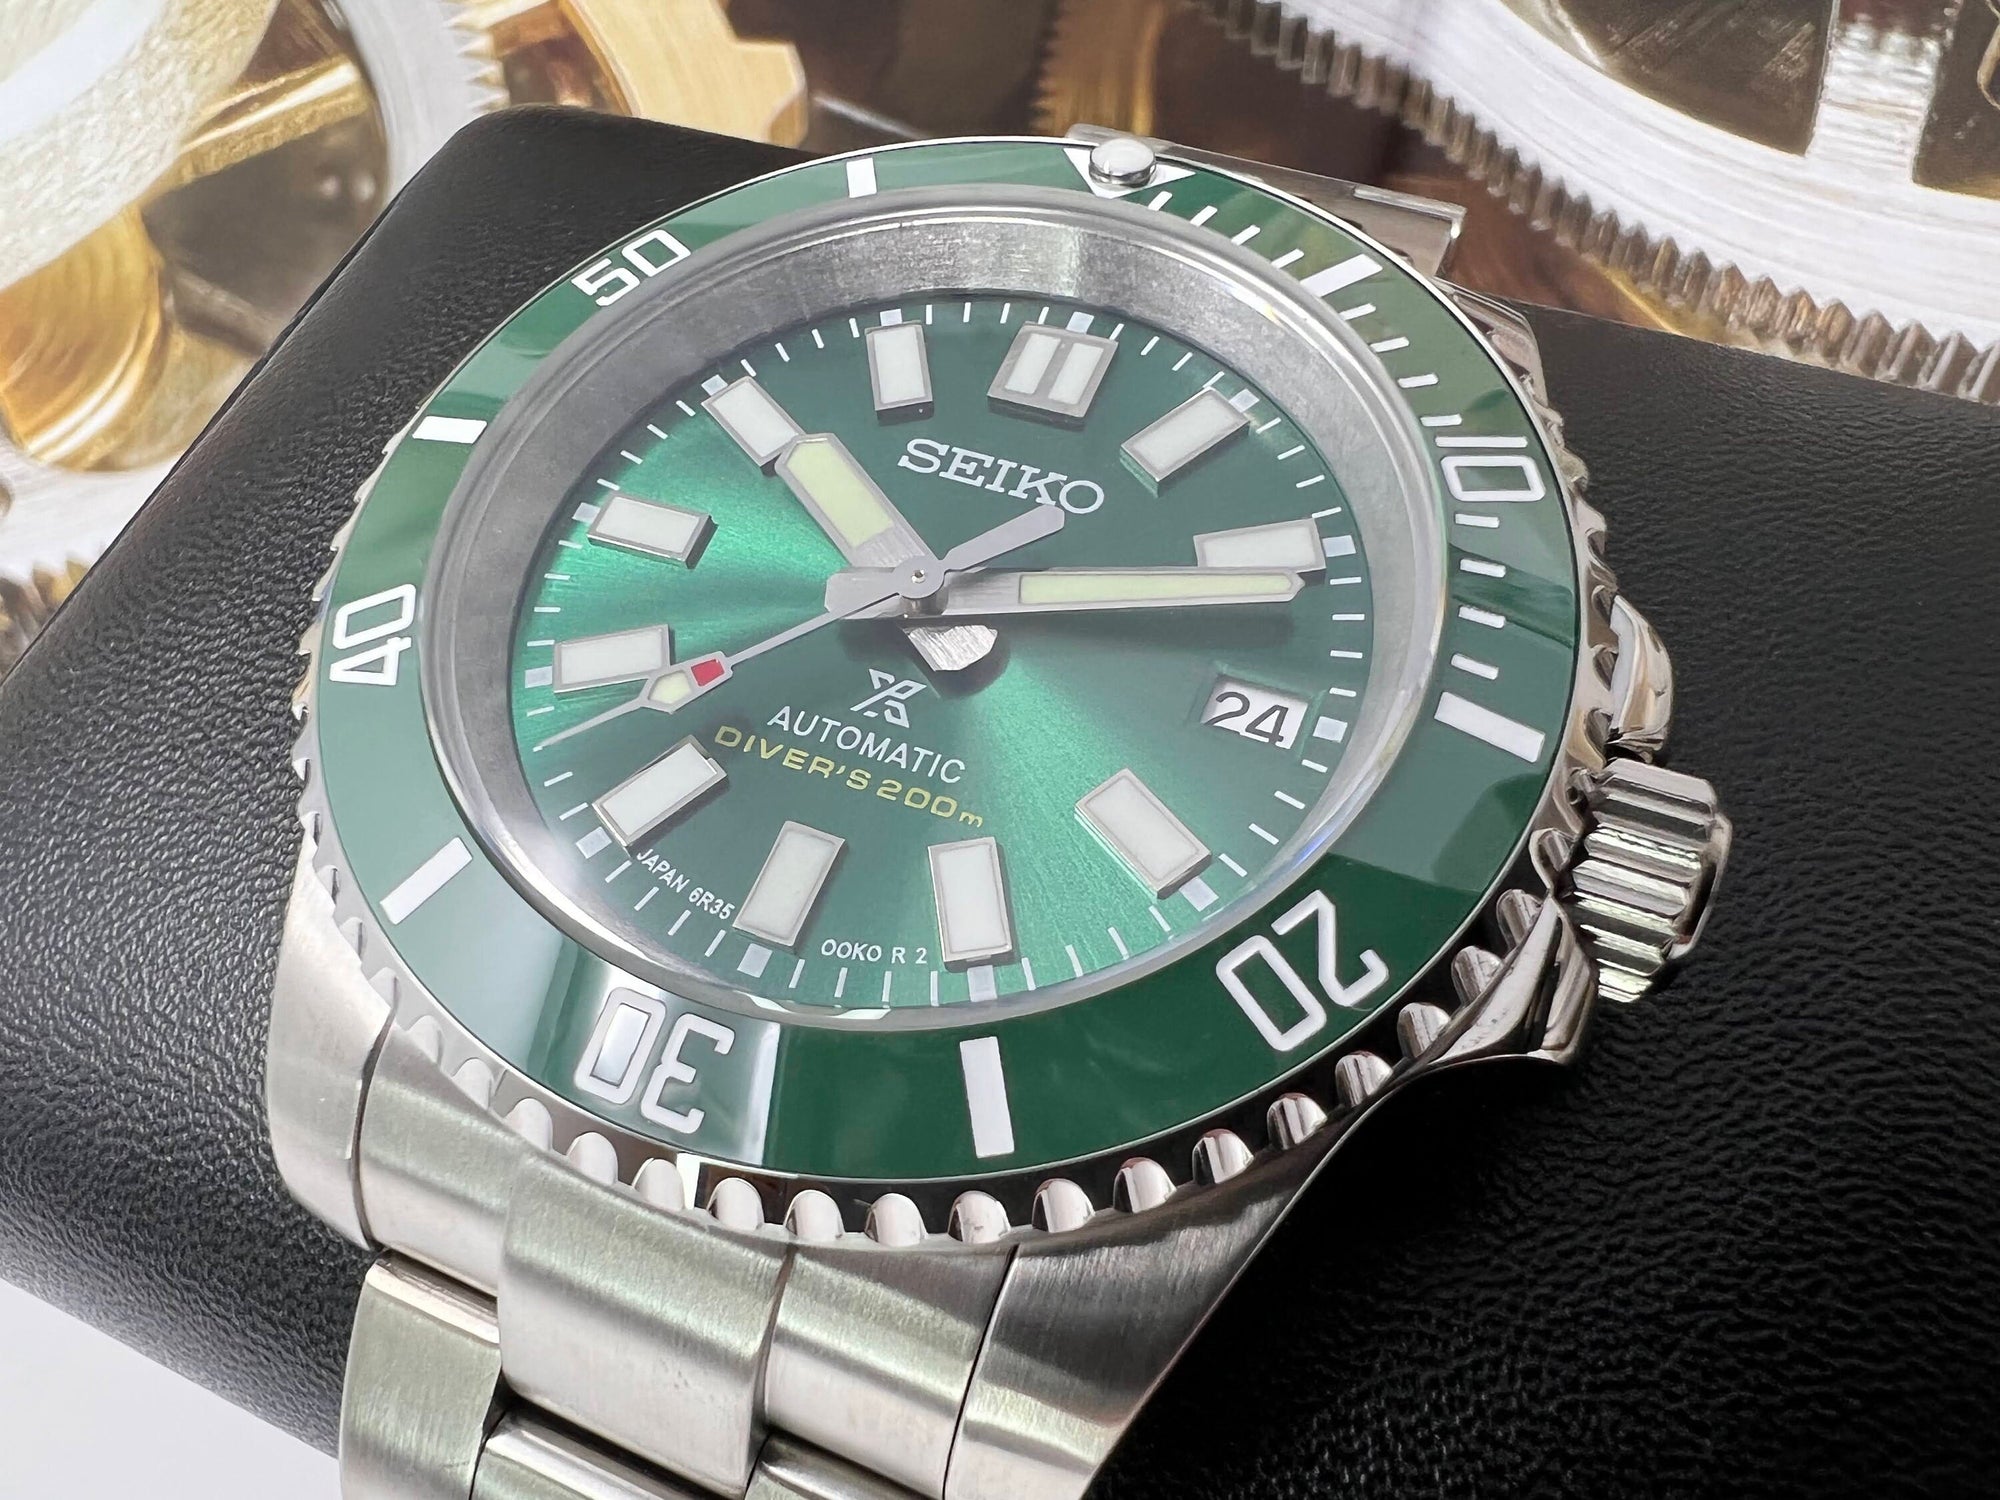 Seiko Hulk Max Submariner - Stainless Steel with Sapphire Crystal, Oyster Steel Bracelet with Green Ceramic Bezel - Ready to Ship!